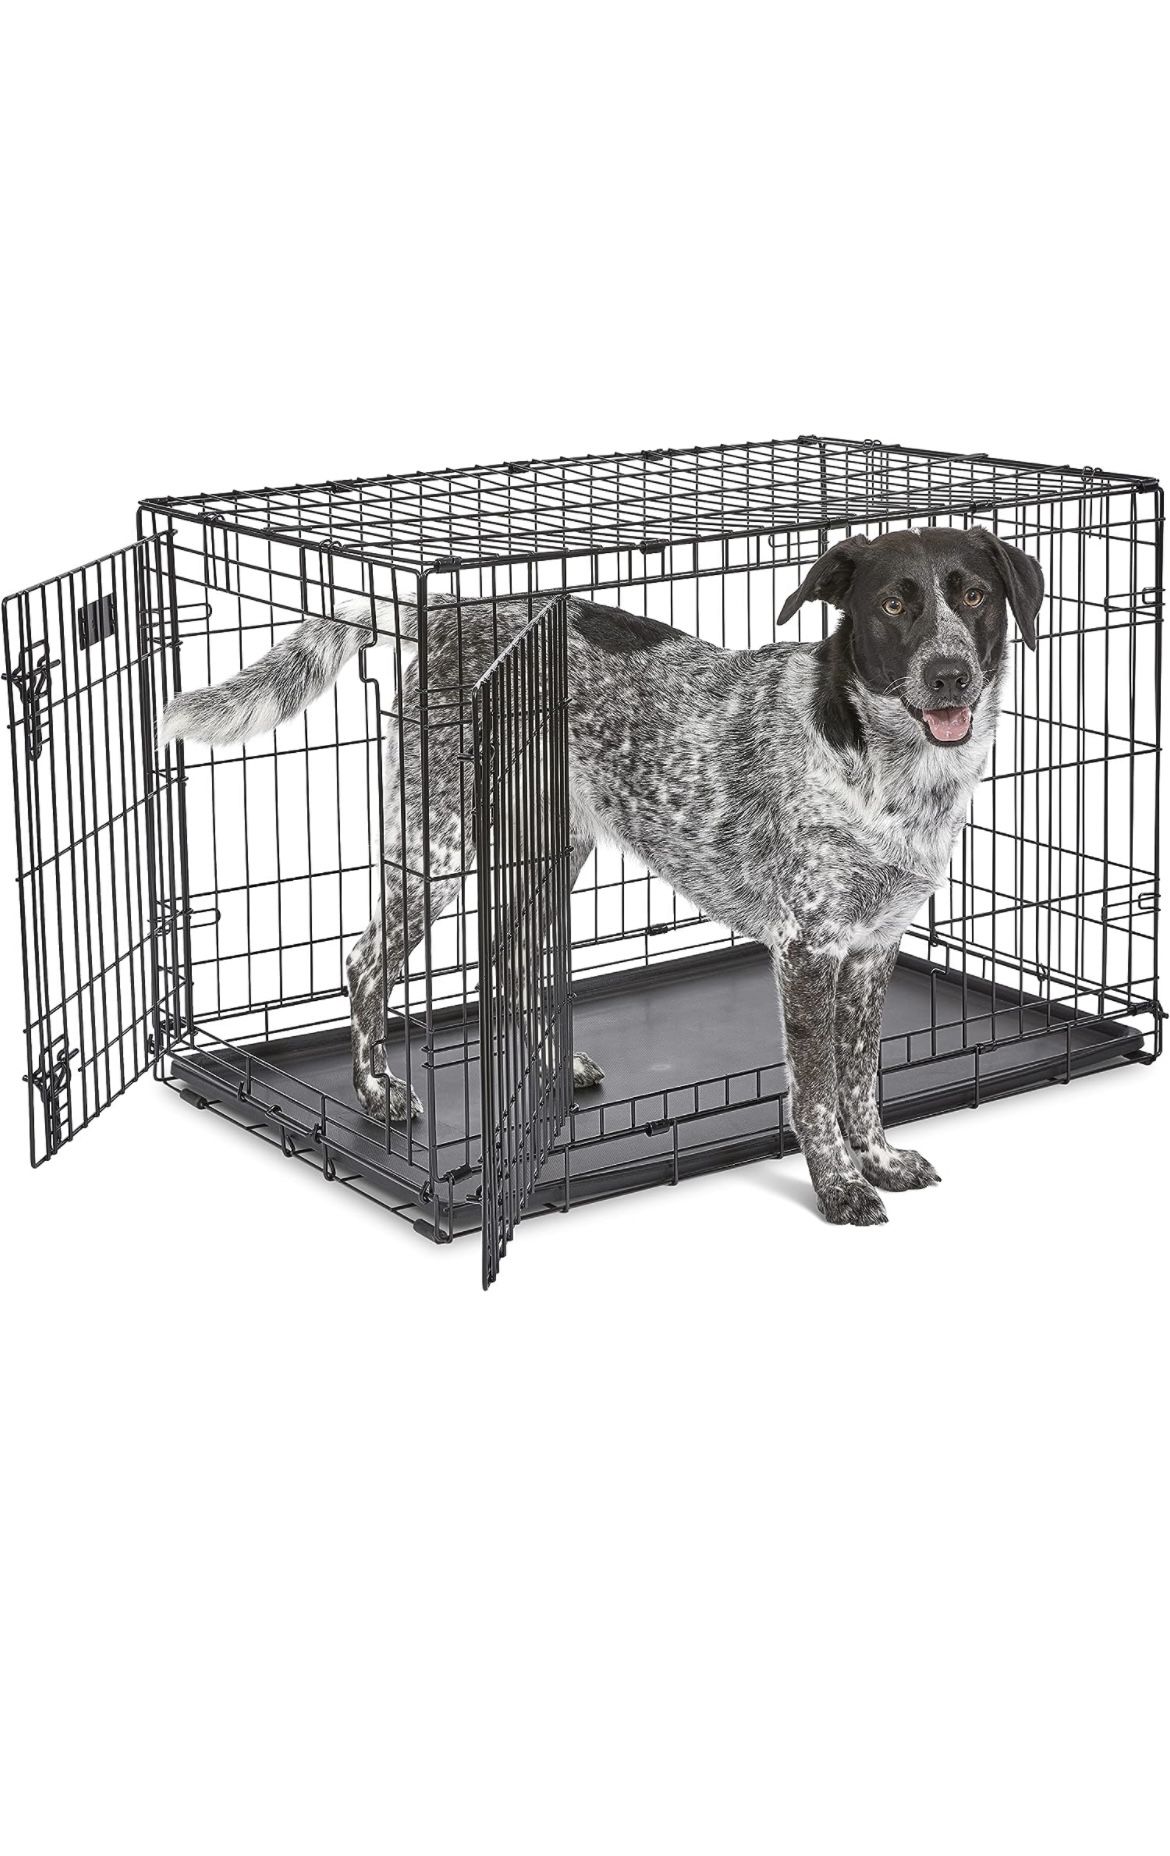 Large dog Crate 